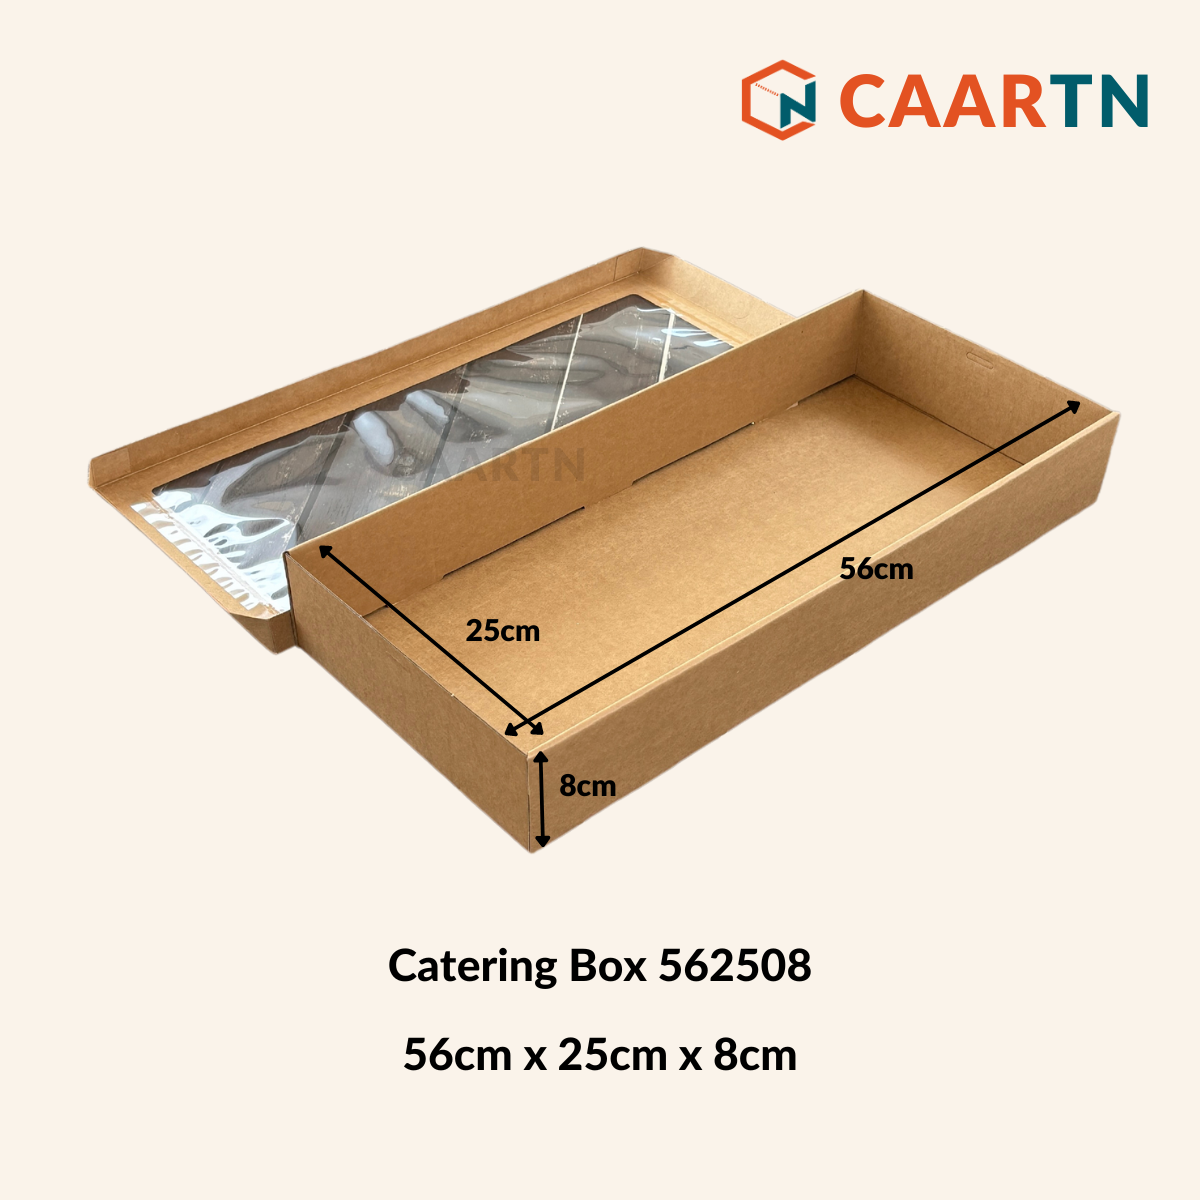 Catering Box 562508